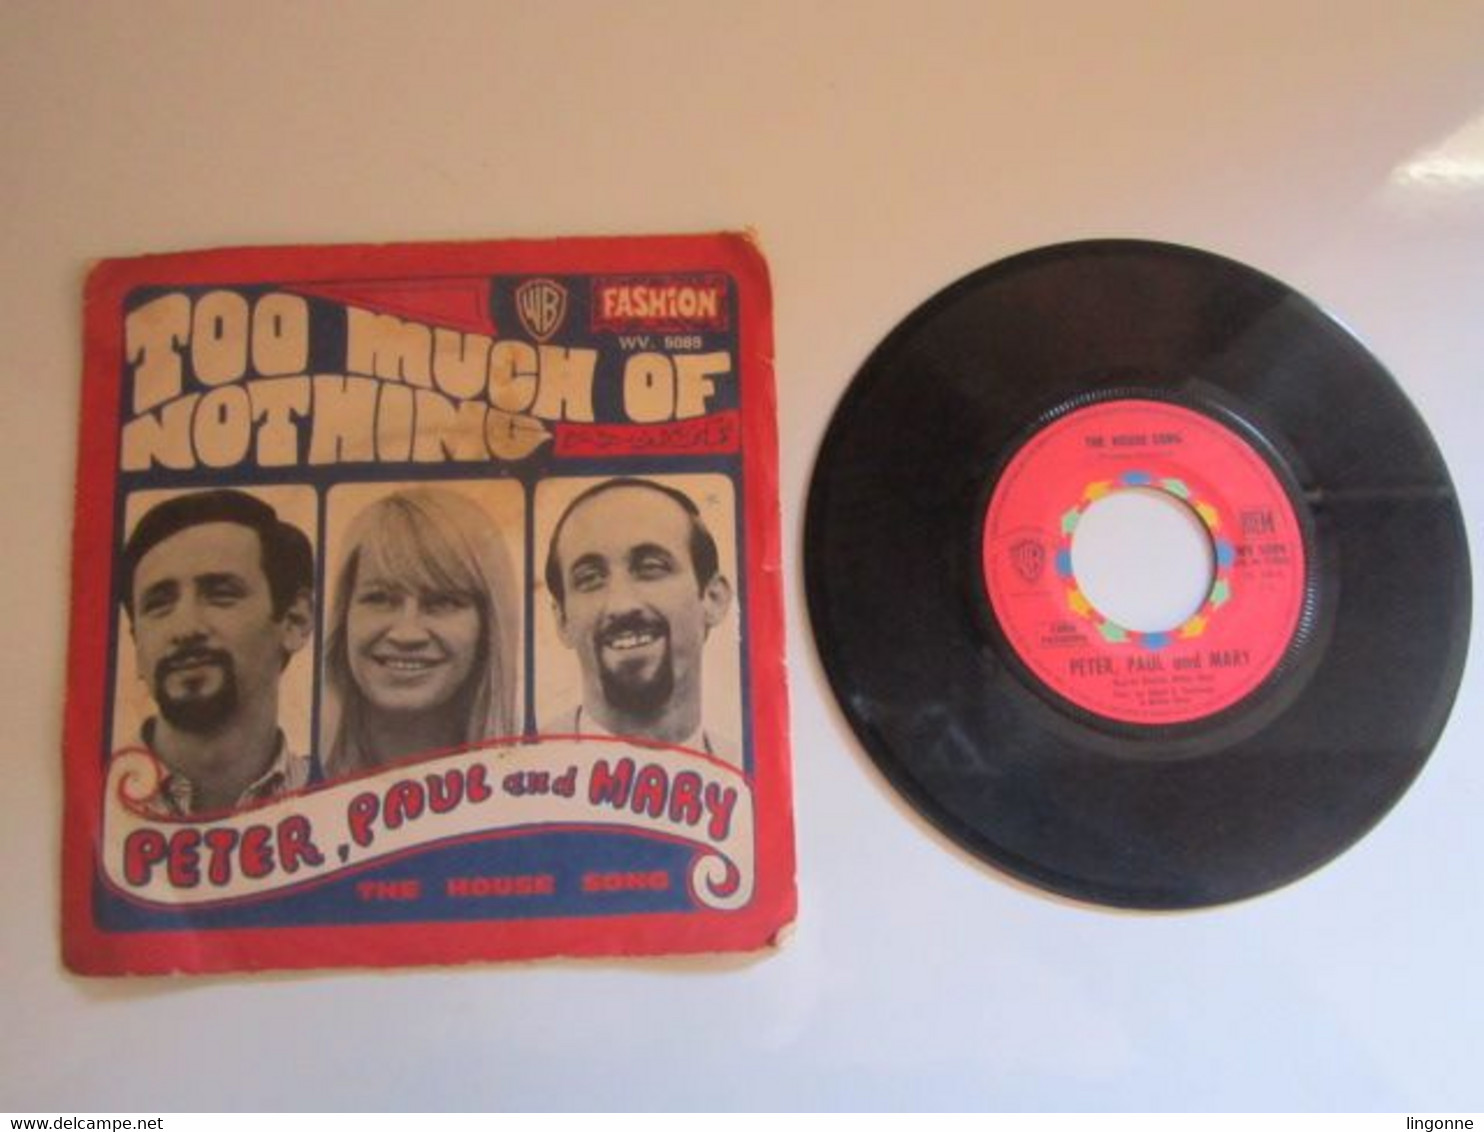 1968 Vinyle 45 Tours Peter, Paul And Mary – Too Much Of Nothing - Country & Folk